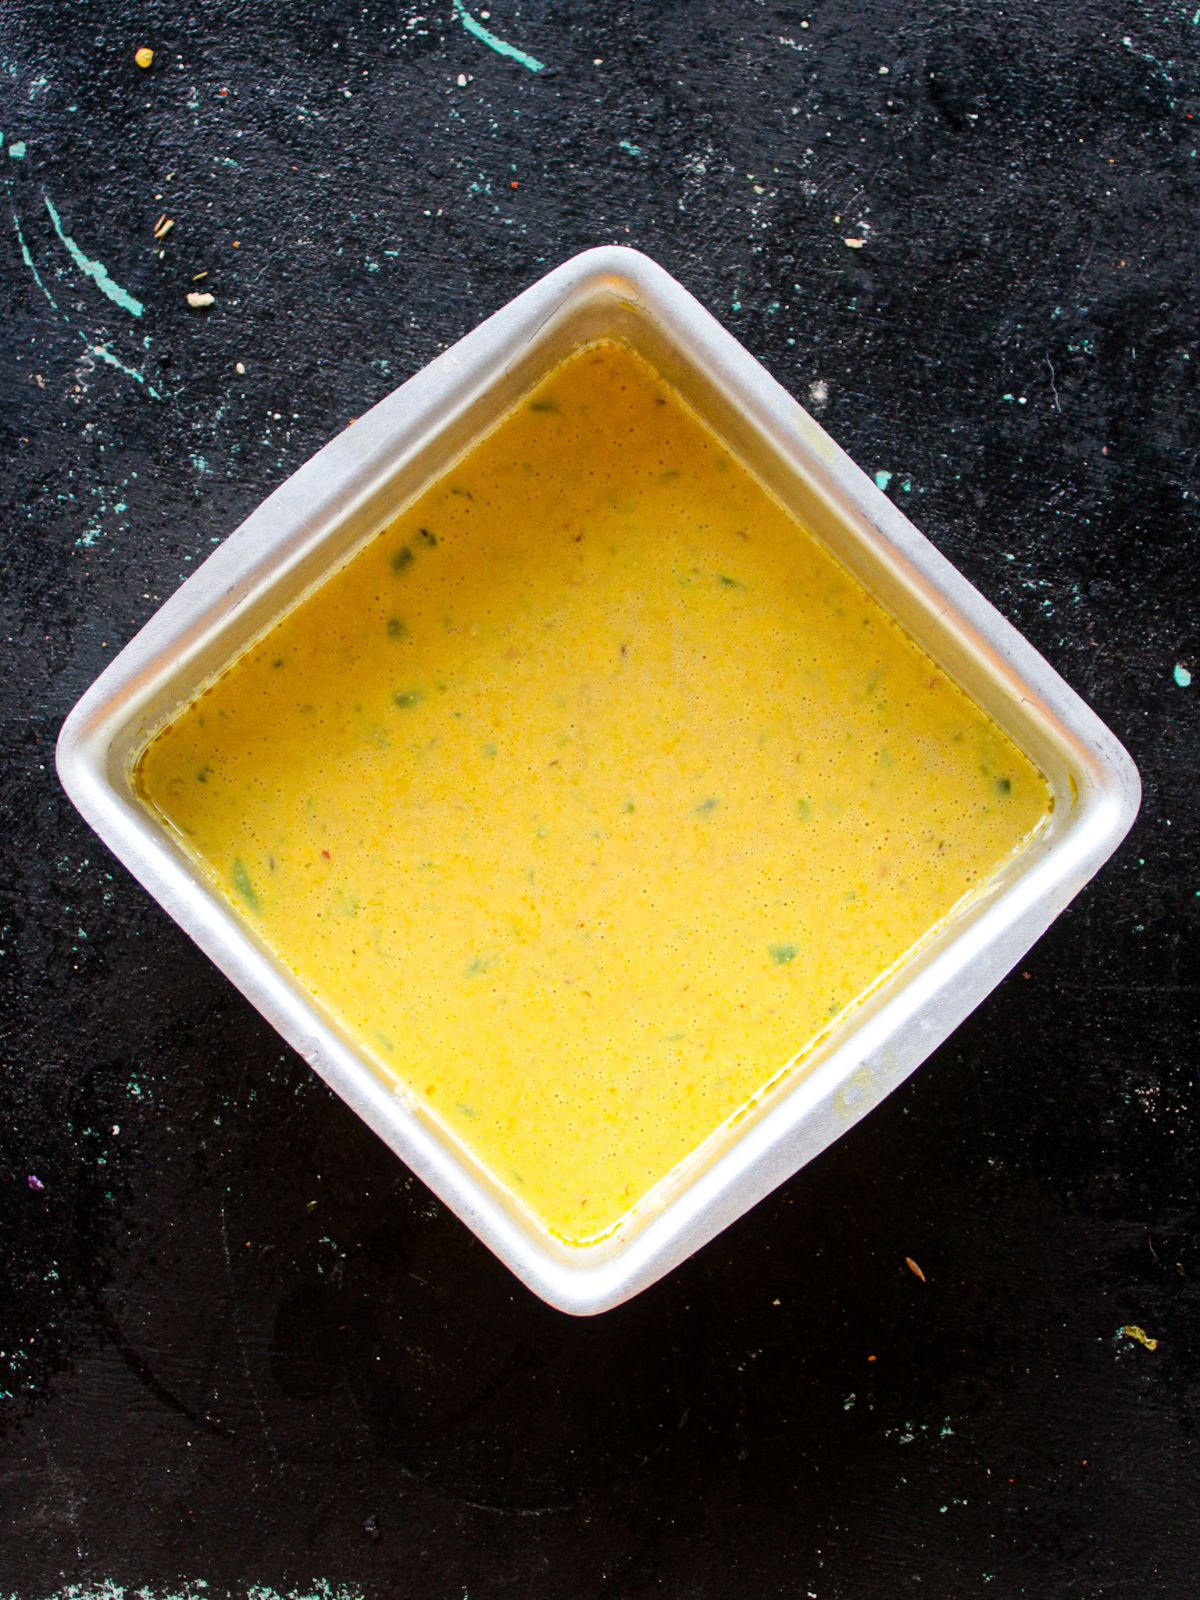 Square white dish filled with yellow batter sitting on black table